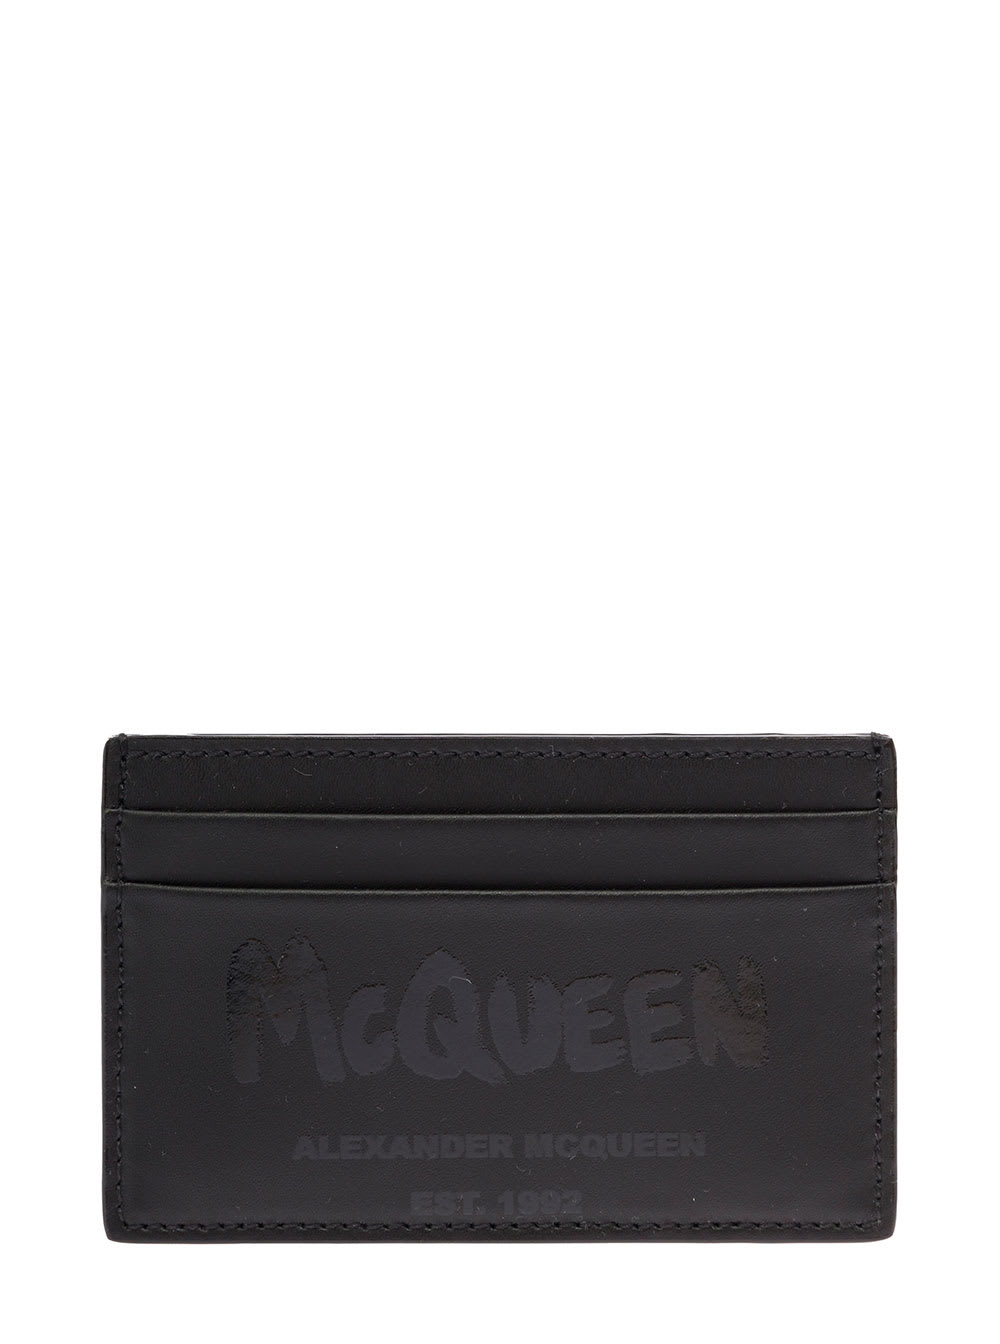 Alexander Mcqueen Man s Black Leather Card Holder With Logo Print